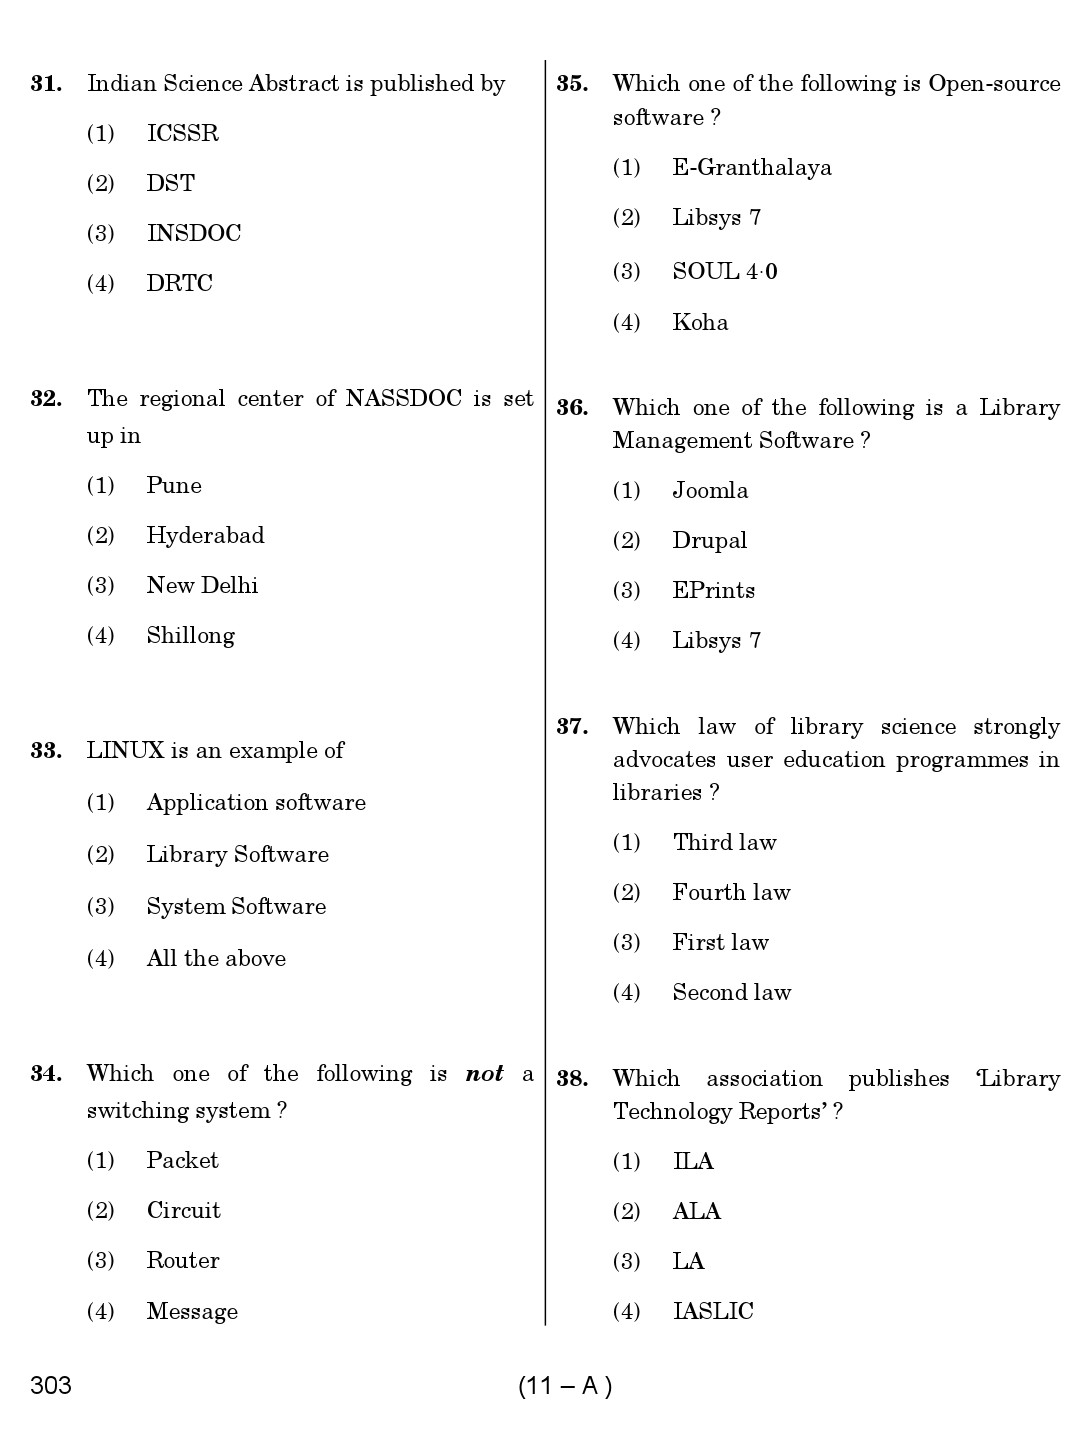 Karnataka PSC 303 Specific Paper II Librarian Exam Sample Question Paper 11